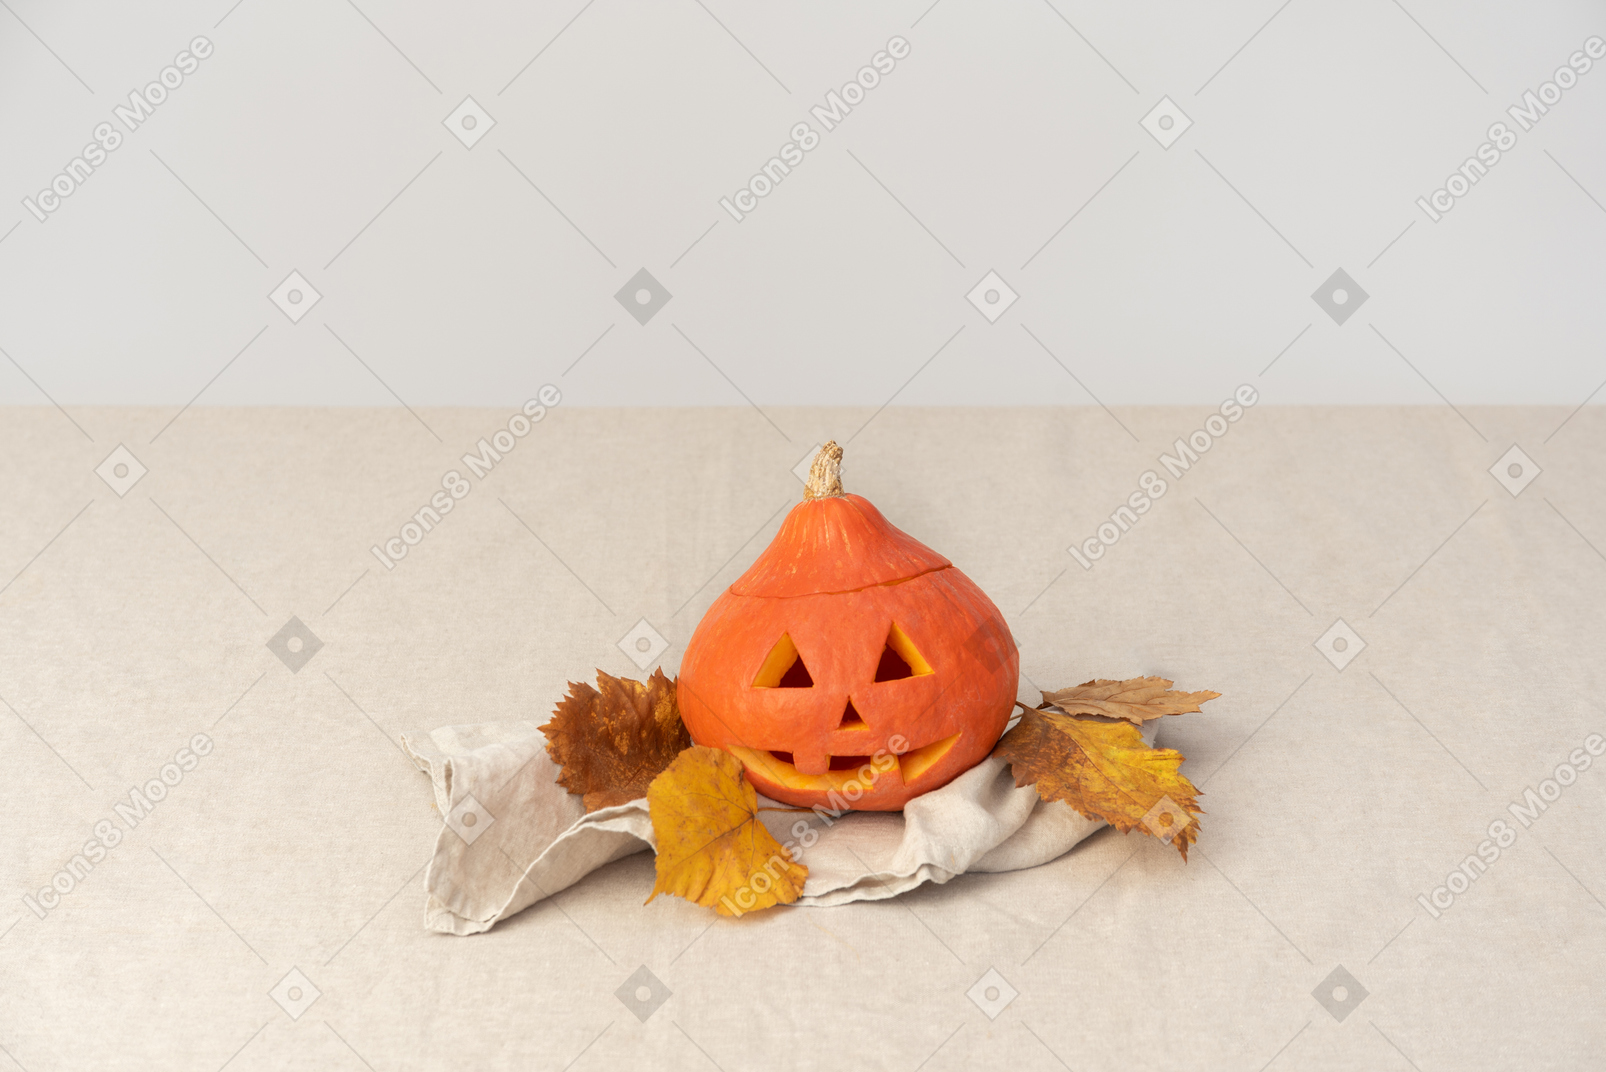 Carved pumpkin and yellow leaves